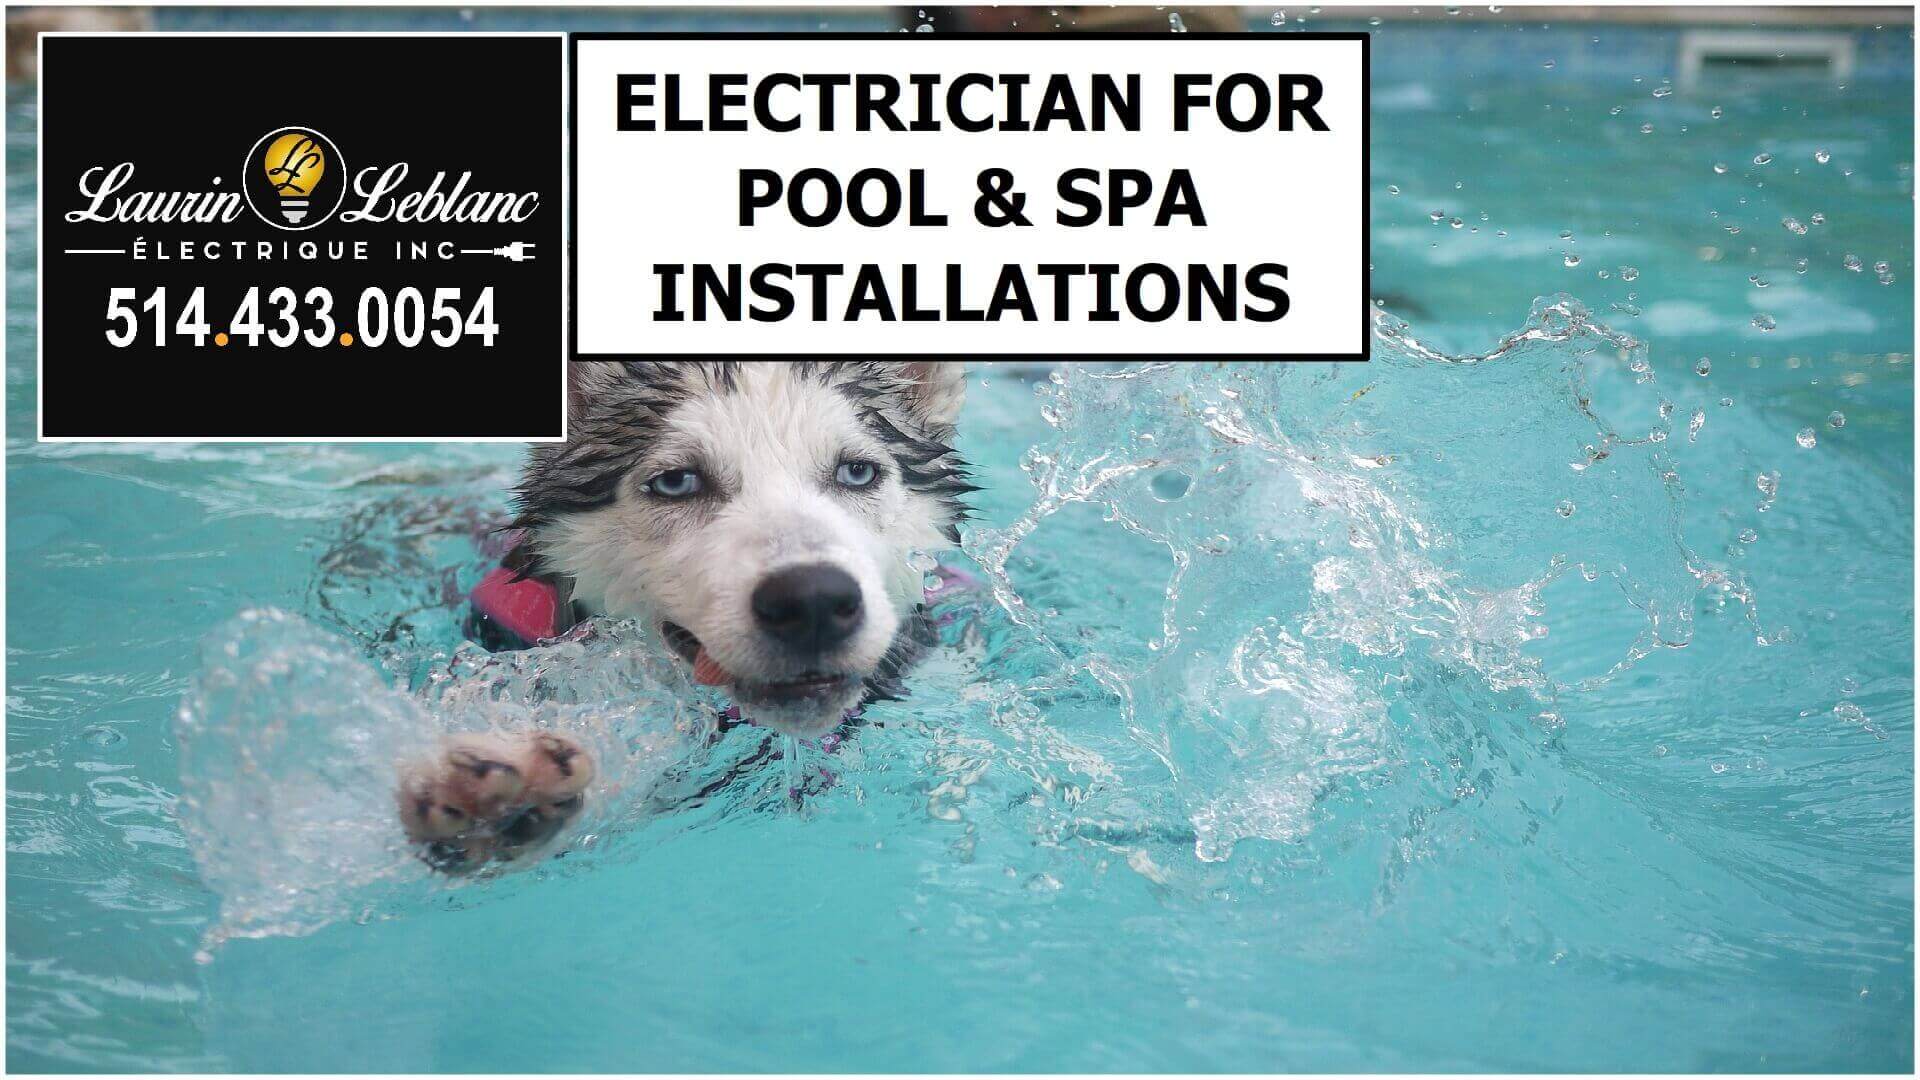 Pool Electrician in Montreal